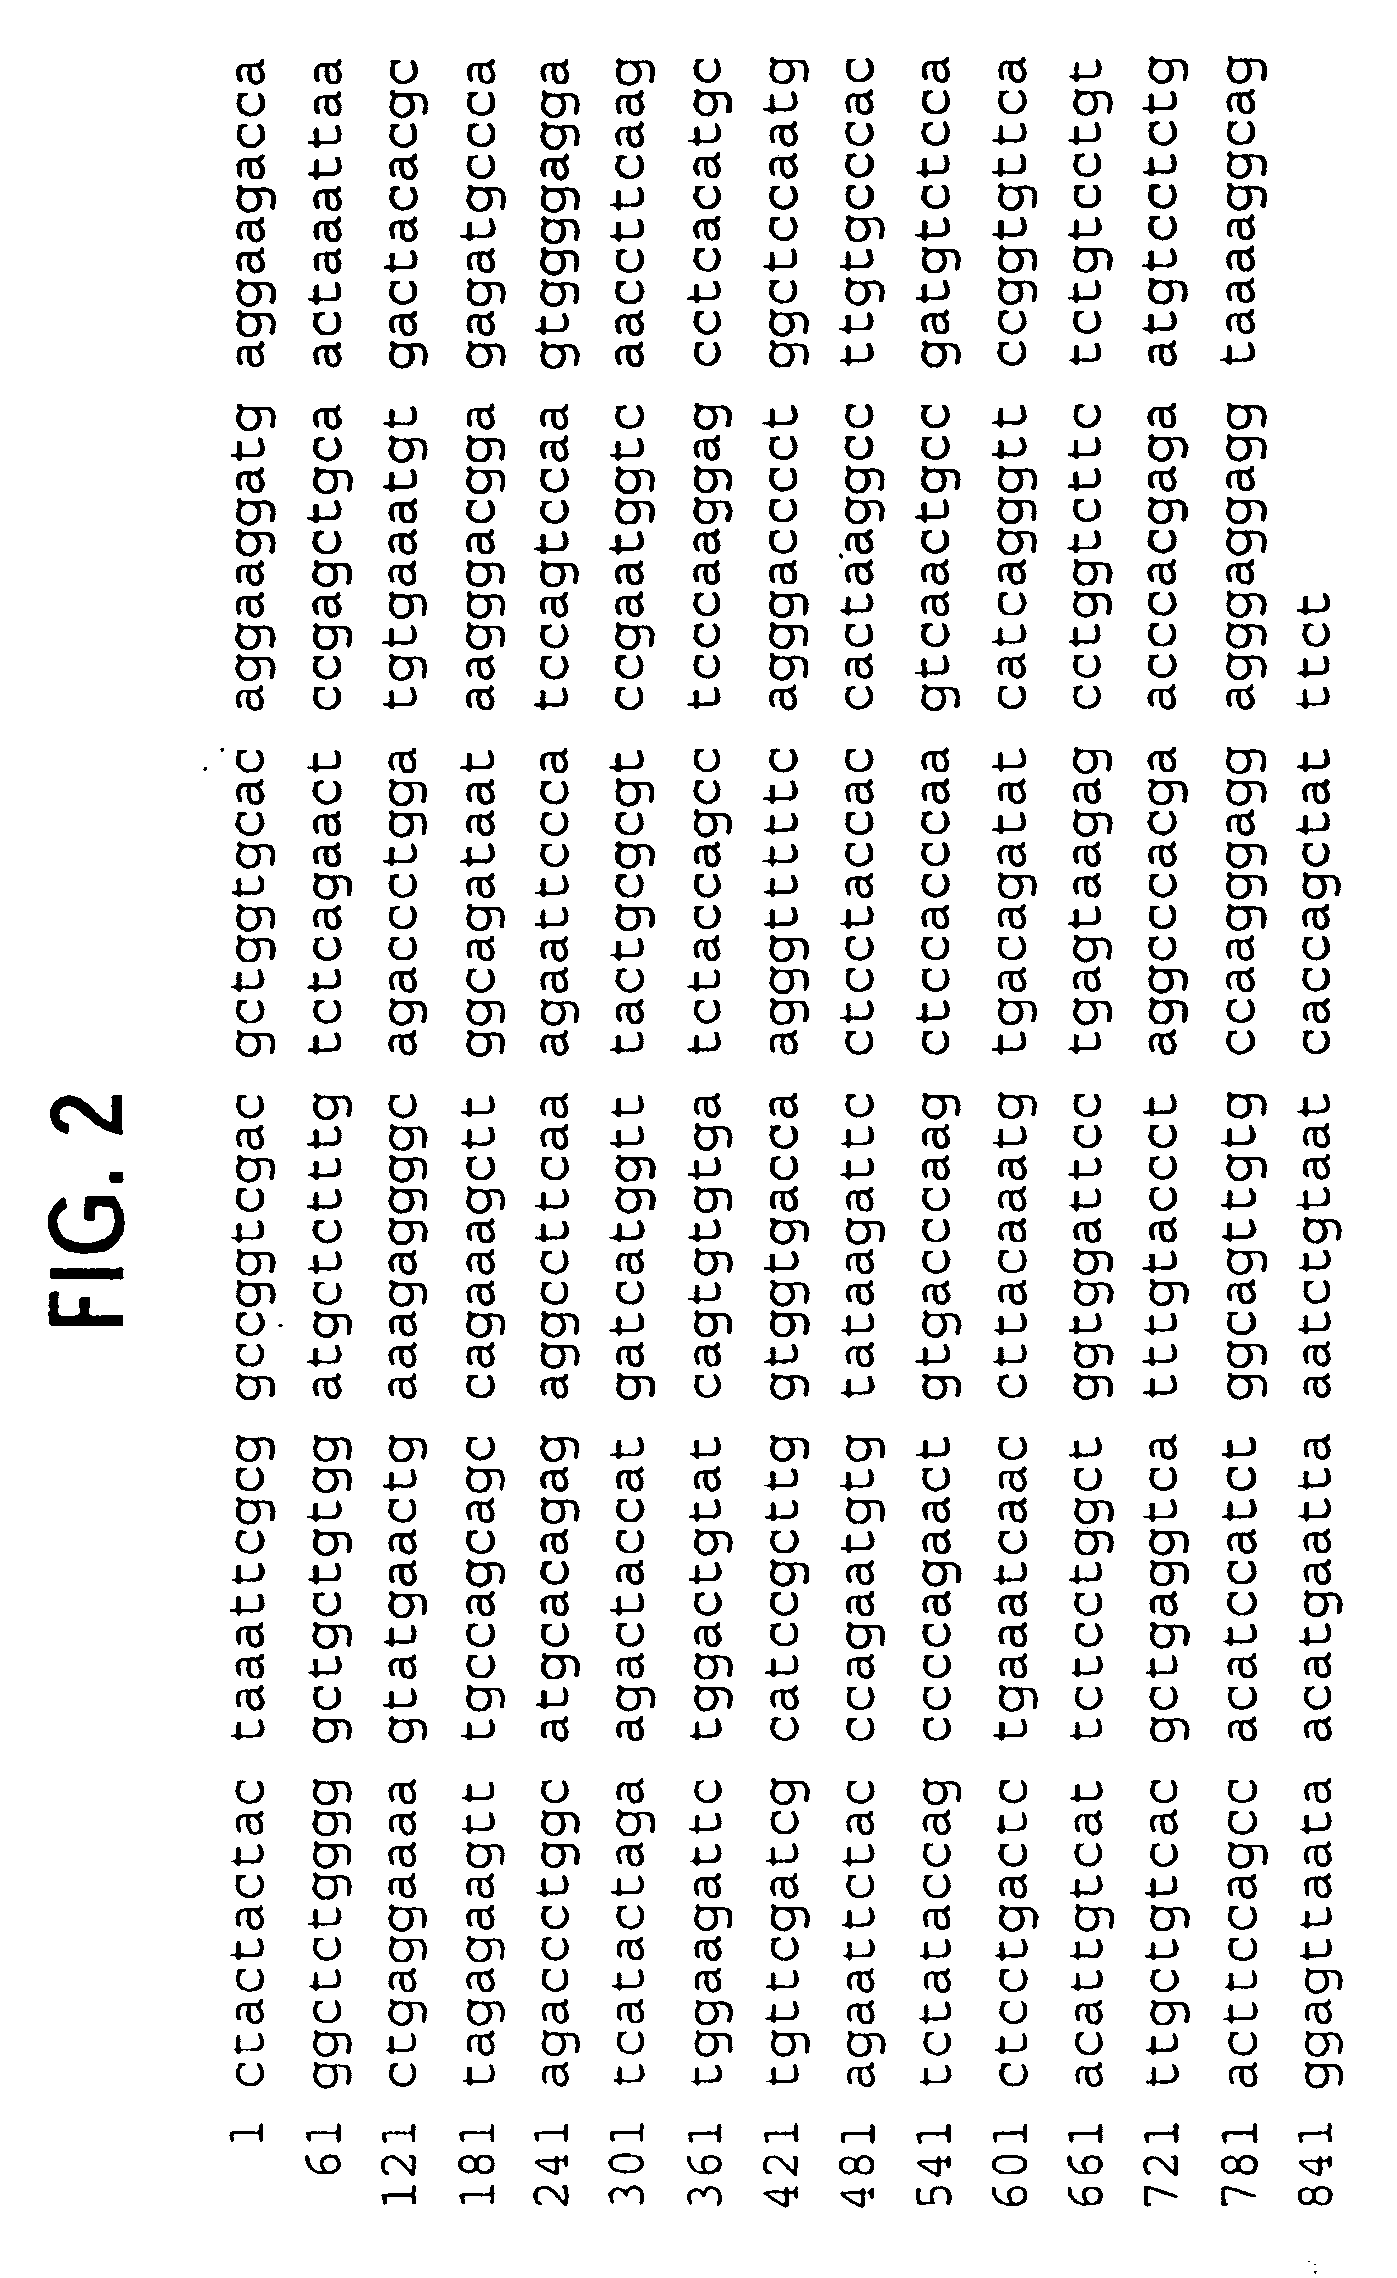 Novel receptor trem (triggering receptor expressed on myeloid cells) and uses thereof